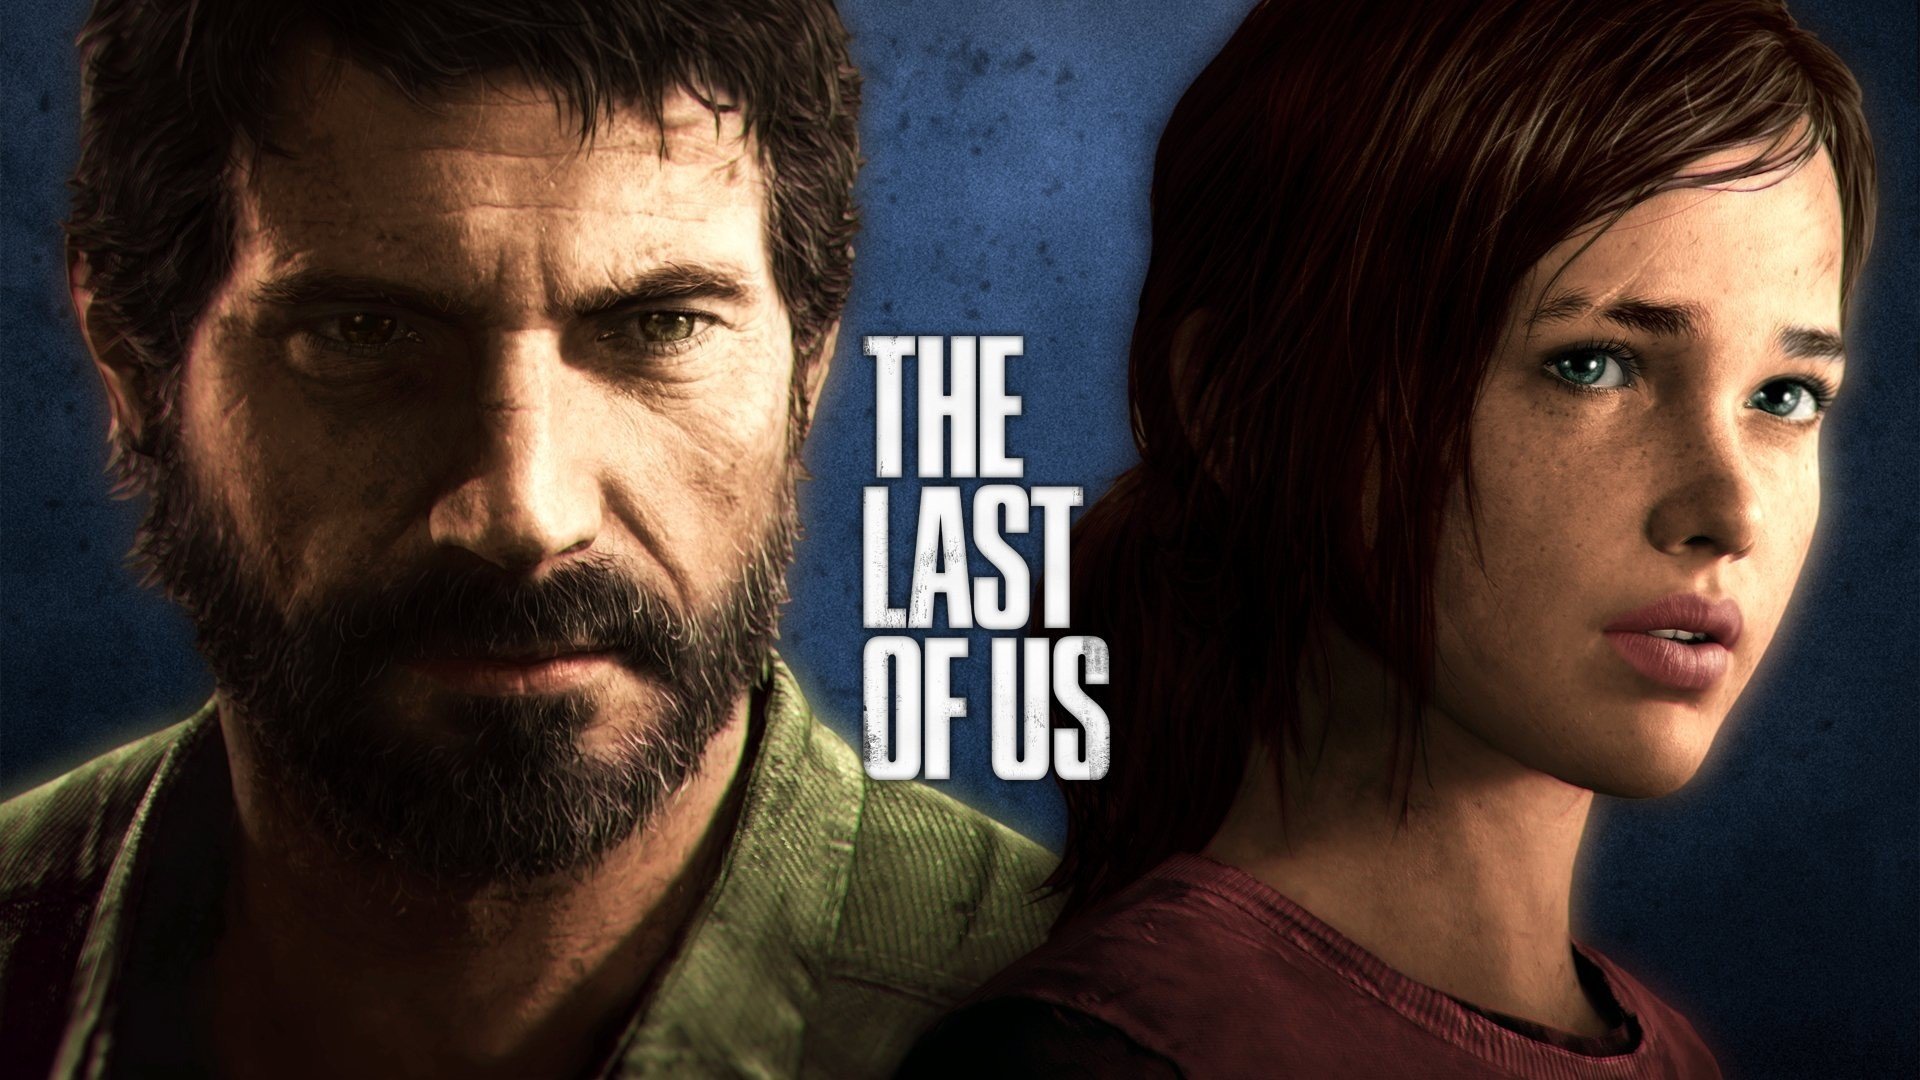 Зе ласт ру. The last of us. The last of us 1. The last of us игра.